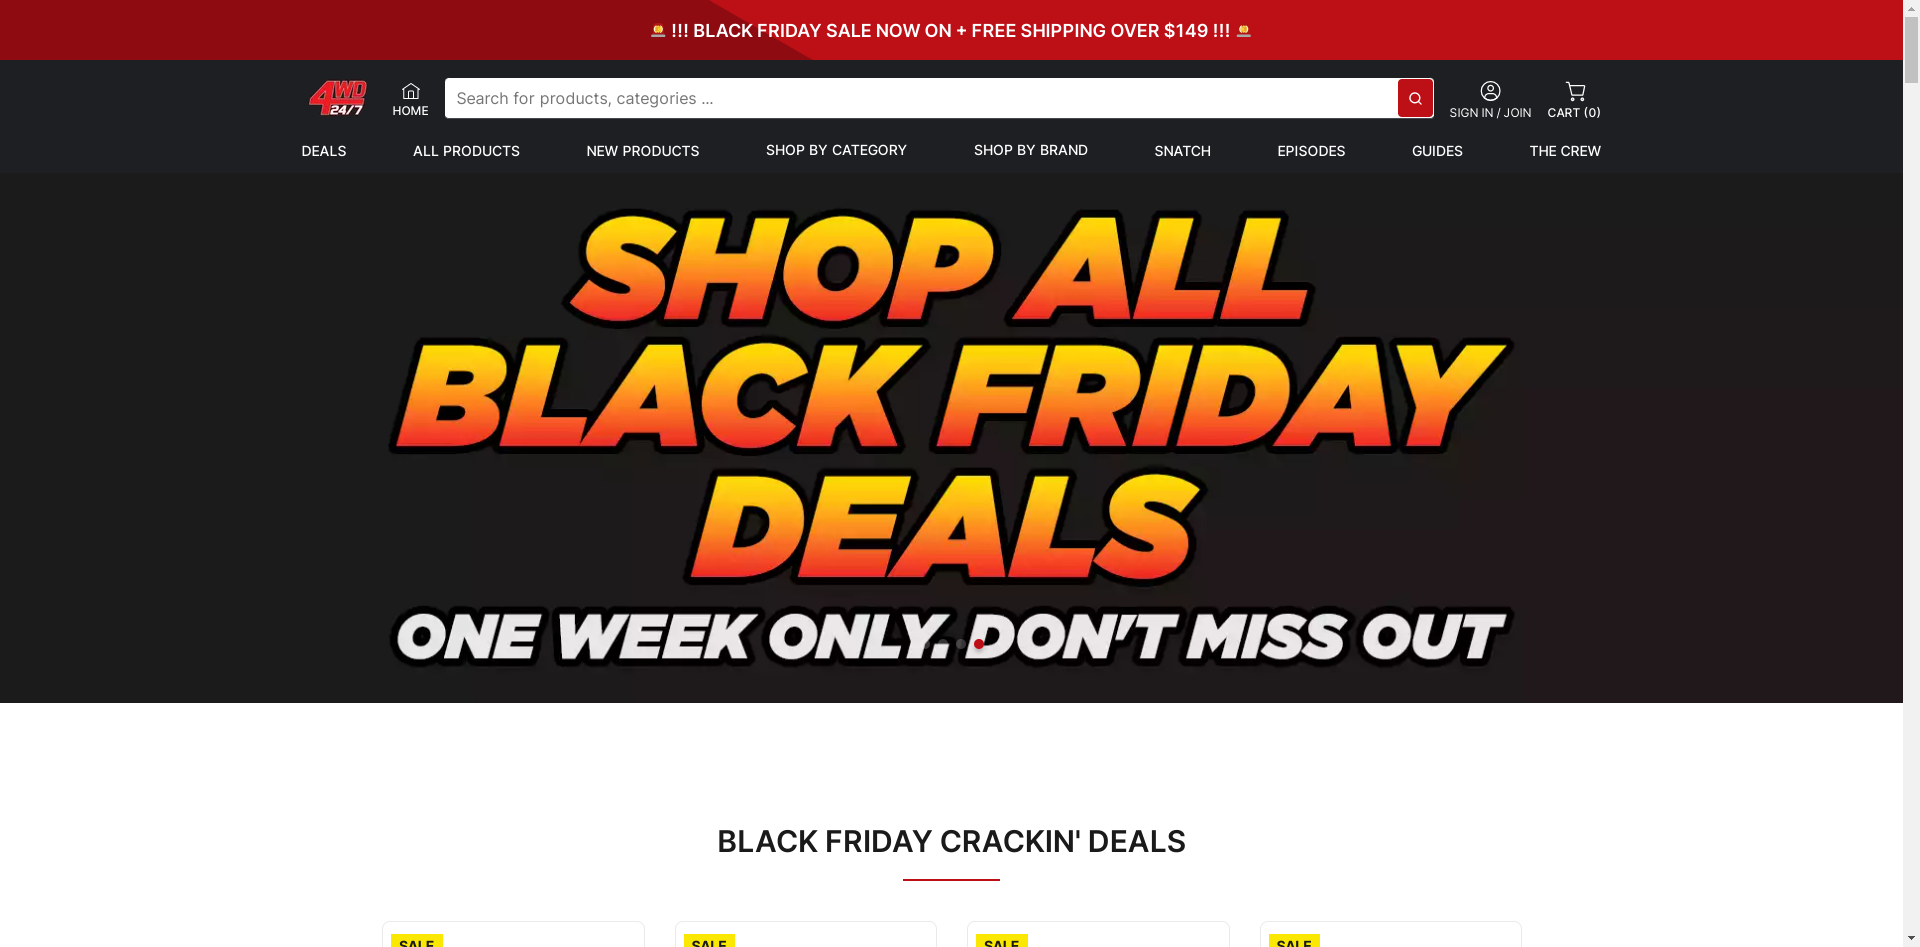 BLACK FRIDAY CRACKIN' DEALS 1 week only - save up to 25% OFF everyday pricing